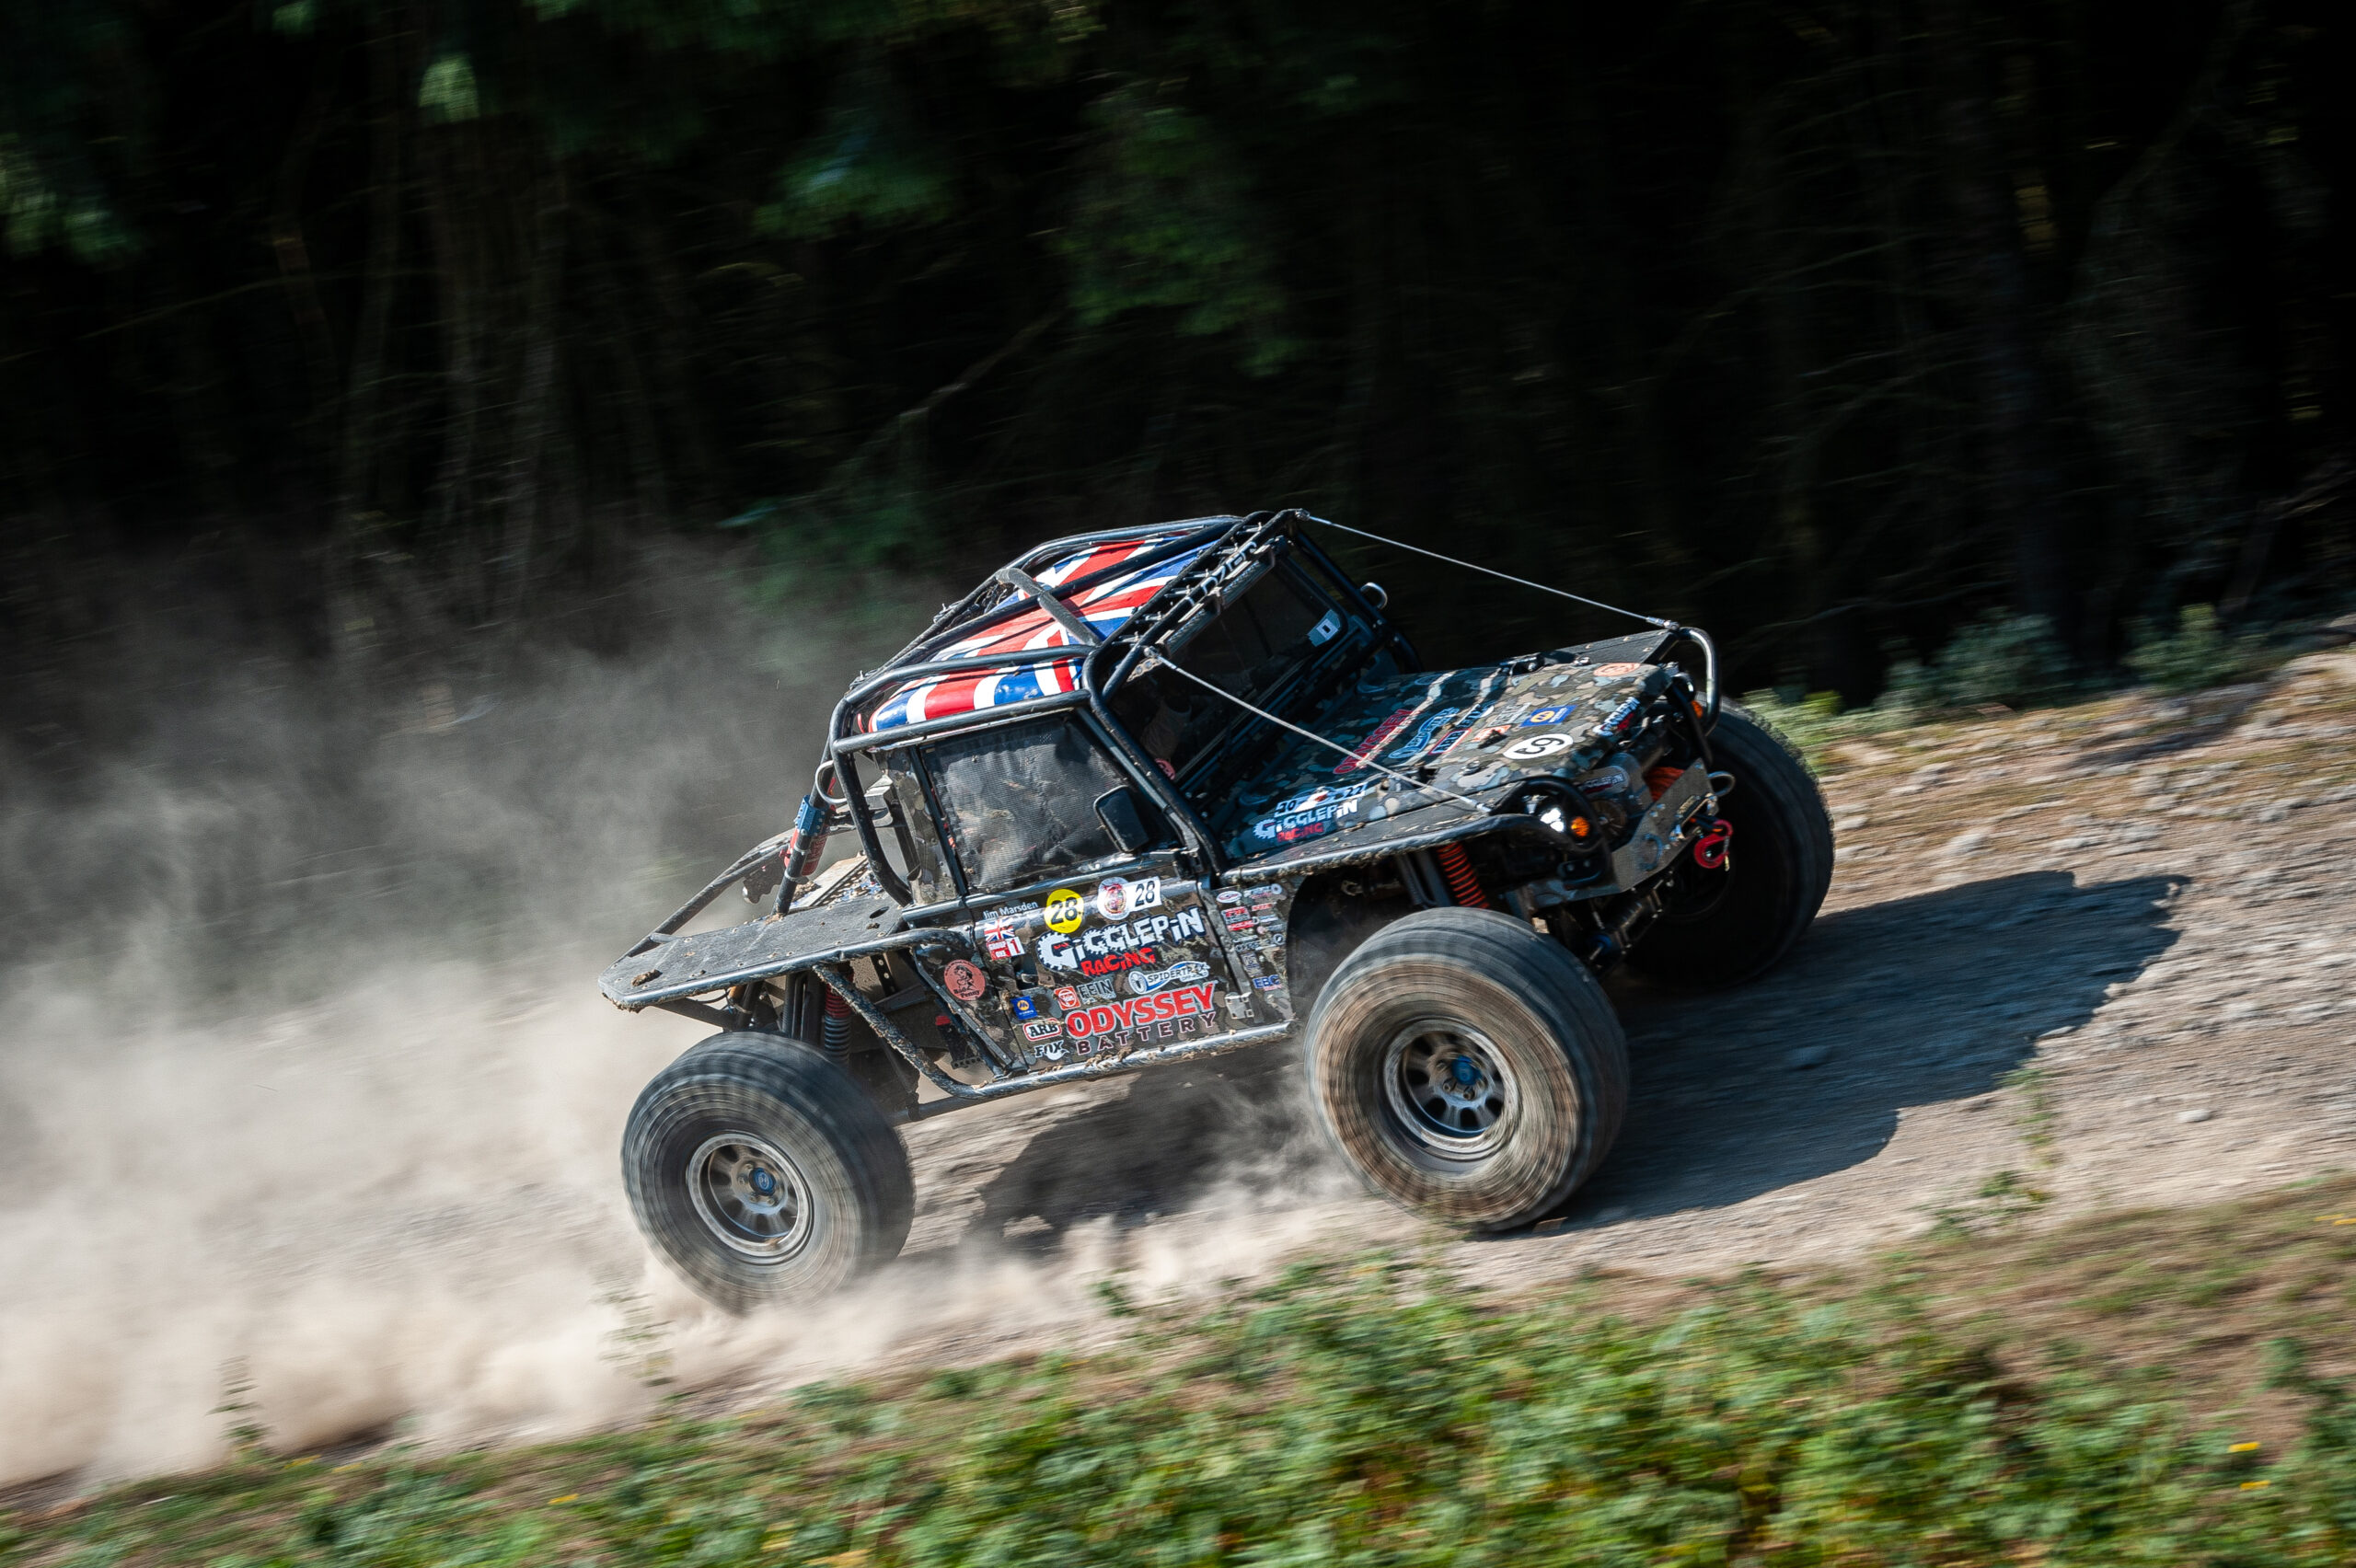 EBC-Equipped Gigglepin Off-Road Team Wins Inaugural TORR Event